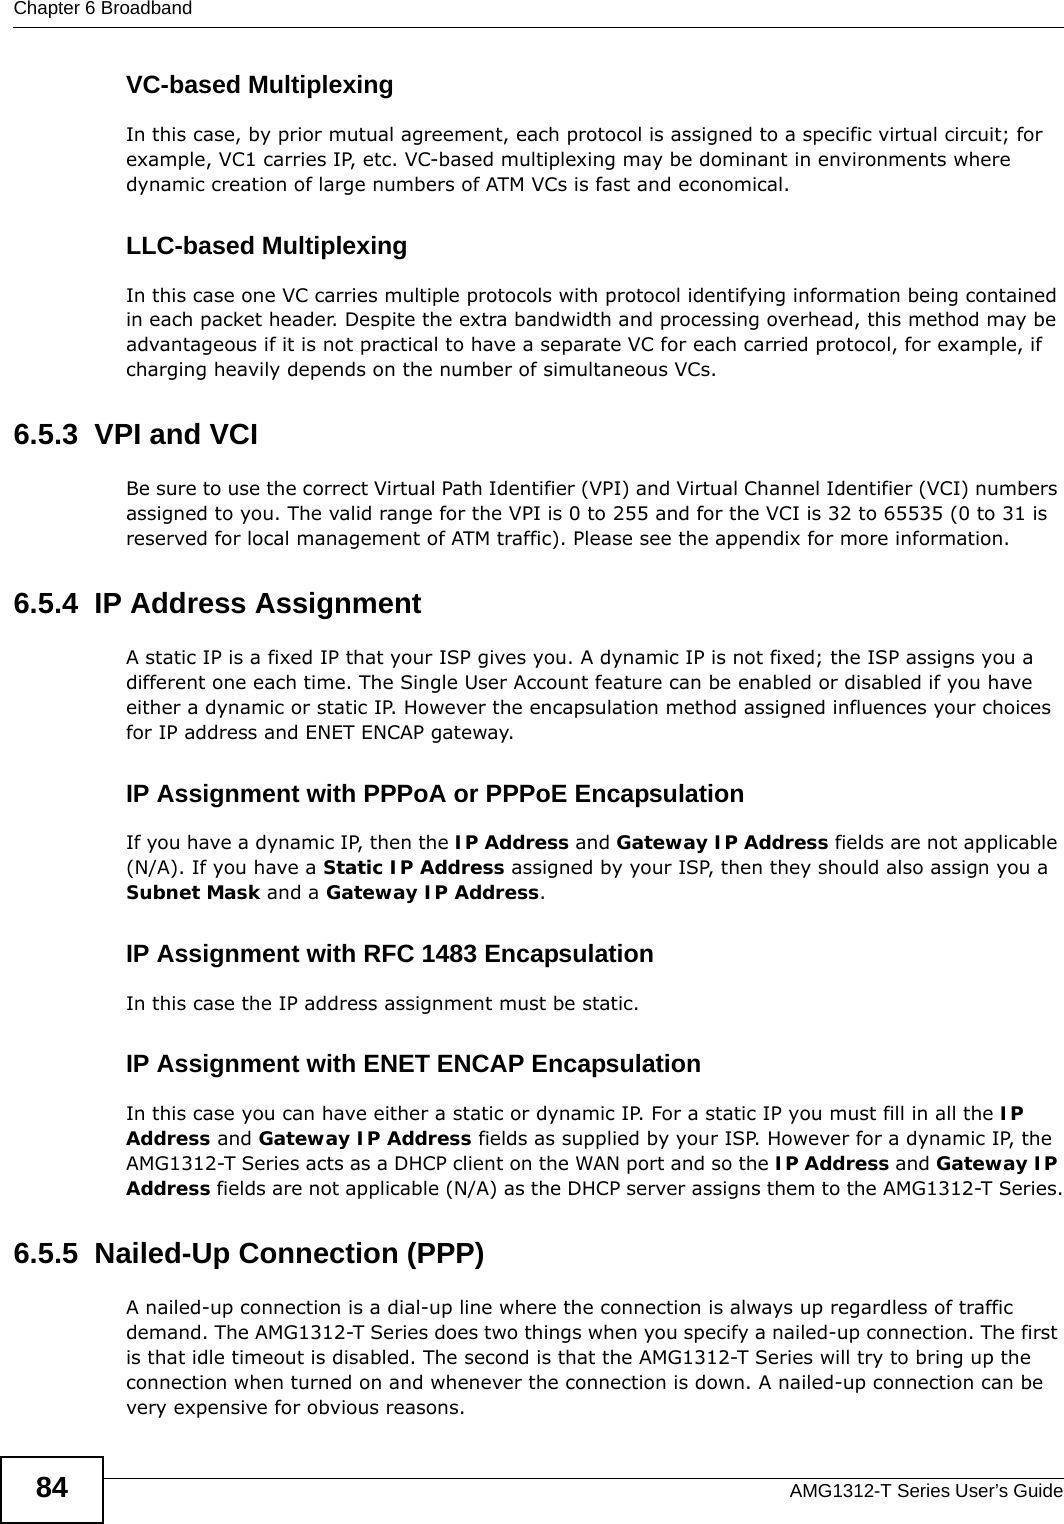 Chapter 6 BroadbandAMG1312-T Series User’s Guide84VC-based MultiplexingIn this case, by prior mutual agreement, each protocol is assigned to a specific virtual circuit; for example, VC1 carries IP, etc. VC-based multiplexing may be dominant in environments where dynamic creation of large numbers of ATM VCs is fast and economical.LLC-based MultiplexingIn this case one VC carries multiple protocols with protocol identifying information being contained in each packet header. Despite the extra bandwidth and processing overhead, this method may be advantageous if it is not practical to have a separate VC for each carried protocol, for example, if charging heavily depends on the number of simultaneous VCs.6.5.3  VPI and VCIBe sure to use the correct Virtual Path Identifier (VPI) and Virtual Channel Identifier (VCI) numbers assigned to you. The valid range for the VPI is 0 to 255 and for the VCI is 32 to 65535 (0 to 31 is reserved for local management of ATM traffic). Please see the appendix for more information.6.5.4  IP Address AssignmentA static IP is a fixed IP that your ISP gives you. A dynamic IP is not fixed; the ISP assigns you a different one each time. The Single User Account feature can be enabled or disabled if you have either a dynamic or static IP. However the encapsulation method assigned influences your choices for IP address and ENET ENCAP gateway.IP Assignment with PPPoA or PPPoE EncapsulationIf you have a dynamic IP, then the IP Address and Gateway IP Address fields are not applicable (N/A). If you have a Static IP Address assigned by your ISP, then they should also assign you a Subnet Mask and a Gateway IP Address.IP Assignment with RFC 1483 EncapsulationIn this case the IP address assignment must be static.IP Assignment with ENET ENCAP EncapsulationIn this case you can have either a static or dynamic IP. For a static IP you must fill in all the IP Address and Gateway IP Address fields as supplied by your ISP. However for a dynamic IP, the AMG1312-T Series acts as a DHCP client on the WAN port and so the IP Address and Gateway IP Address fields are not applicable (N/A) as the DHCP server assigns them to the AMG1312-T Series.6.5.5  Nailed-Up Connection (PPP)A nailed-up connection is a dial-up line where the connection is always up regardless of traffic demand. The AMG1312-T Series does two things when you specify a nailed-up connection. The first is that idle timeout is disabled. The second is that the AMG1312-T Series will try to bring up the connection when turned on and whenever the connection is down. A nailed-up connection can be very expensive for obvious reasons. 